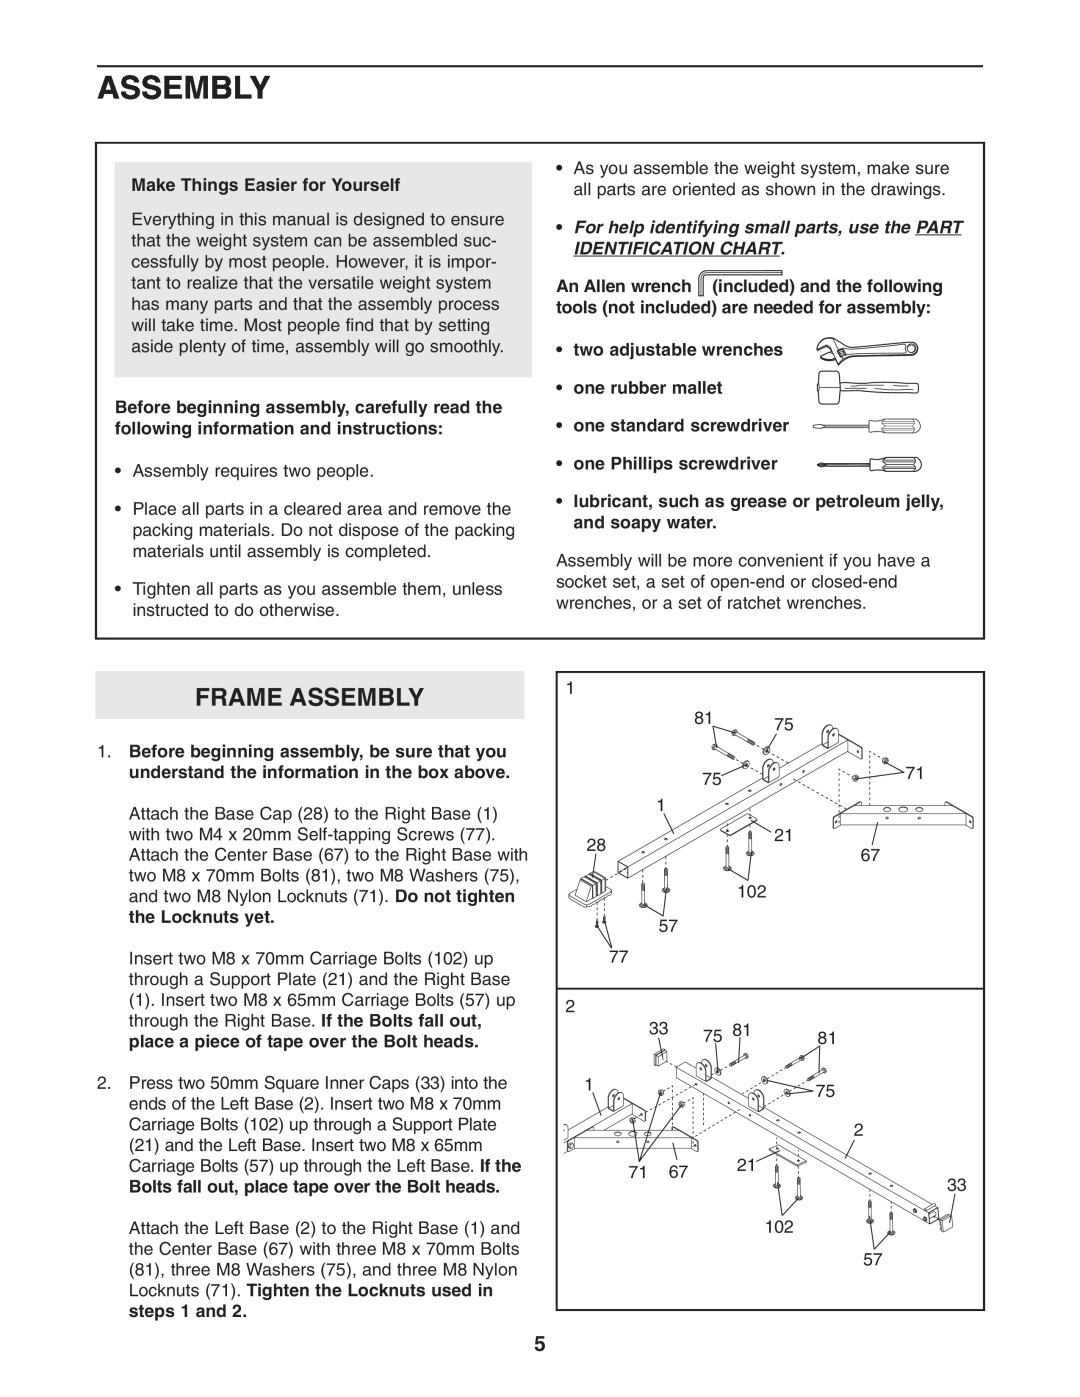 Weider 831.159822 user manual Frame Assembly, For help identifying small parts, use the PART IDENTIFICATION CHART 